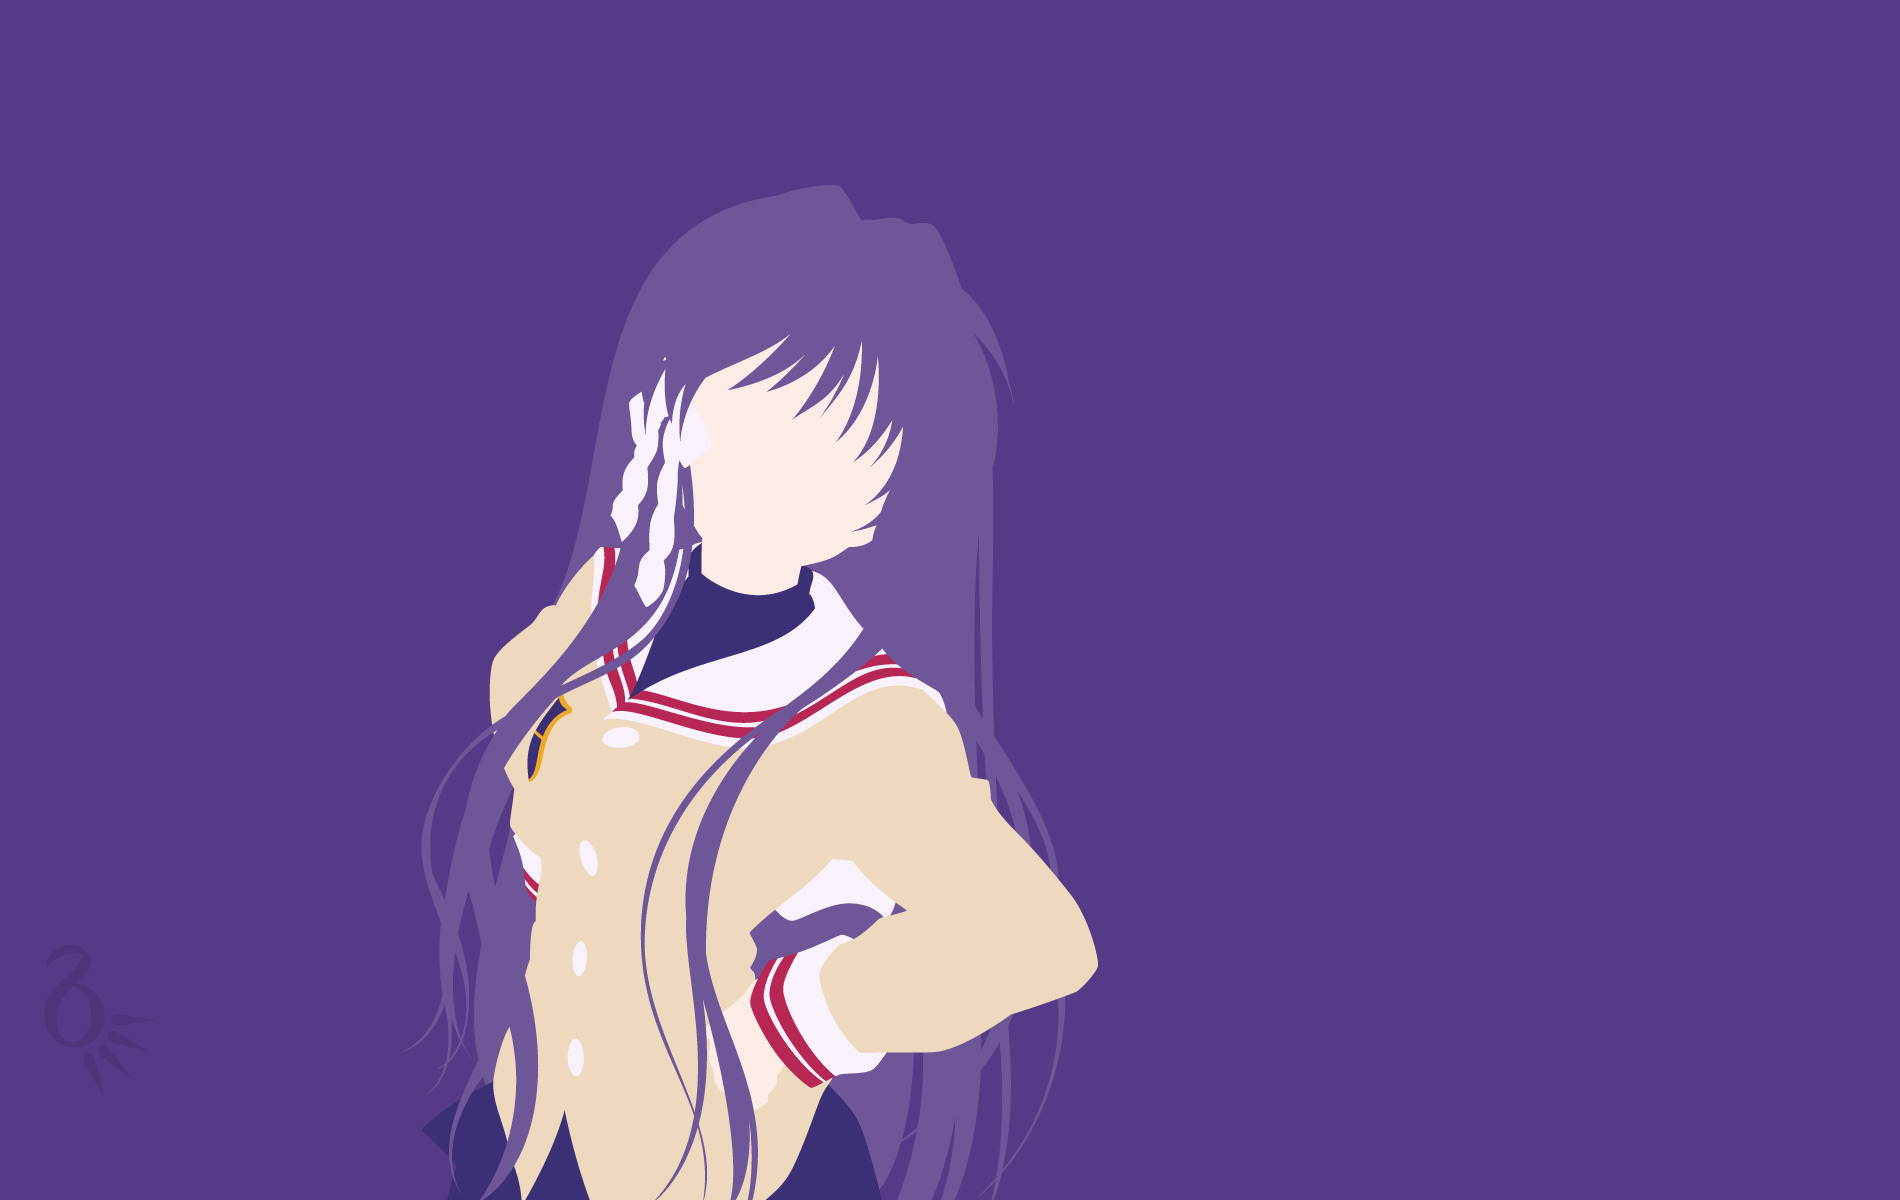 Clannad, Fujibayashi Kyou, Anime, Test Kyou, Please Ignore, Simple Background Wallpaper